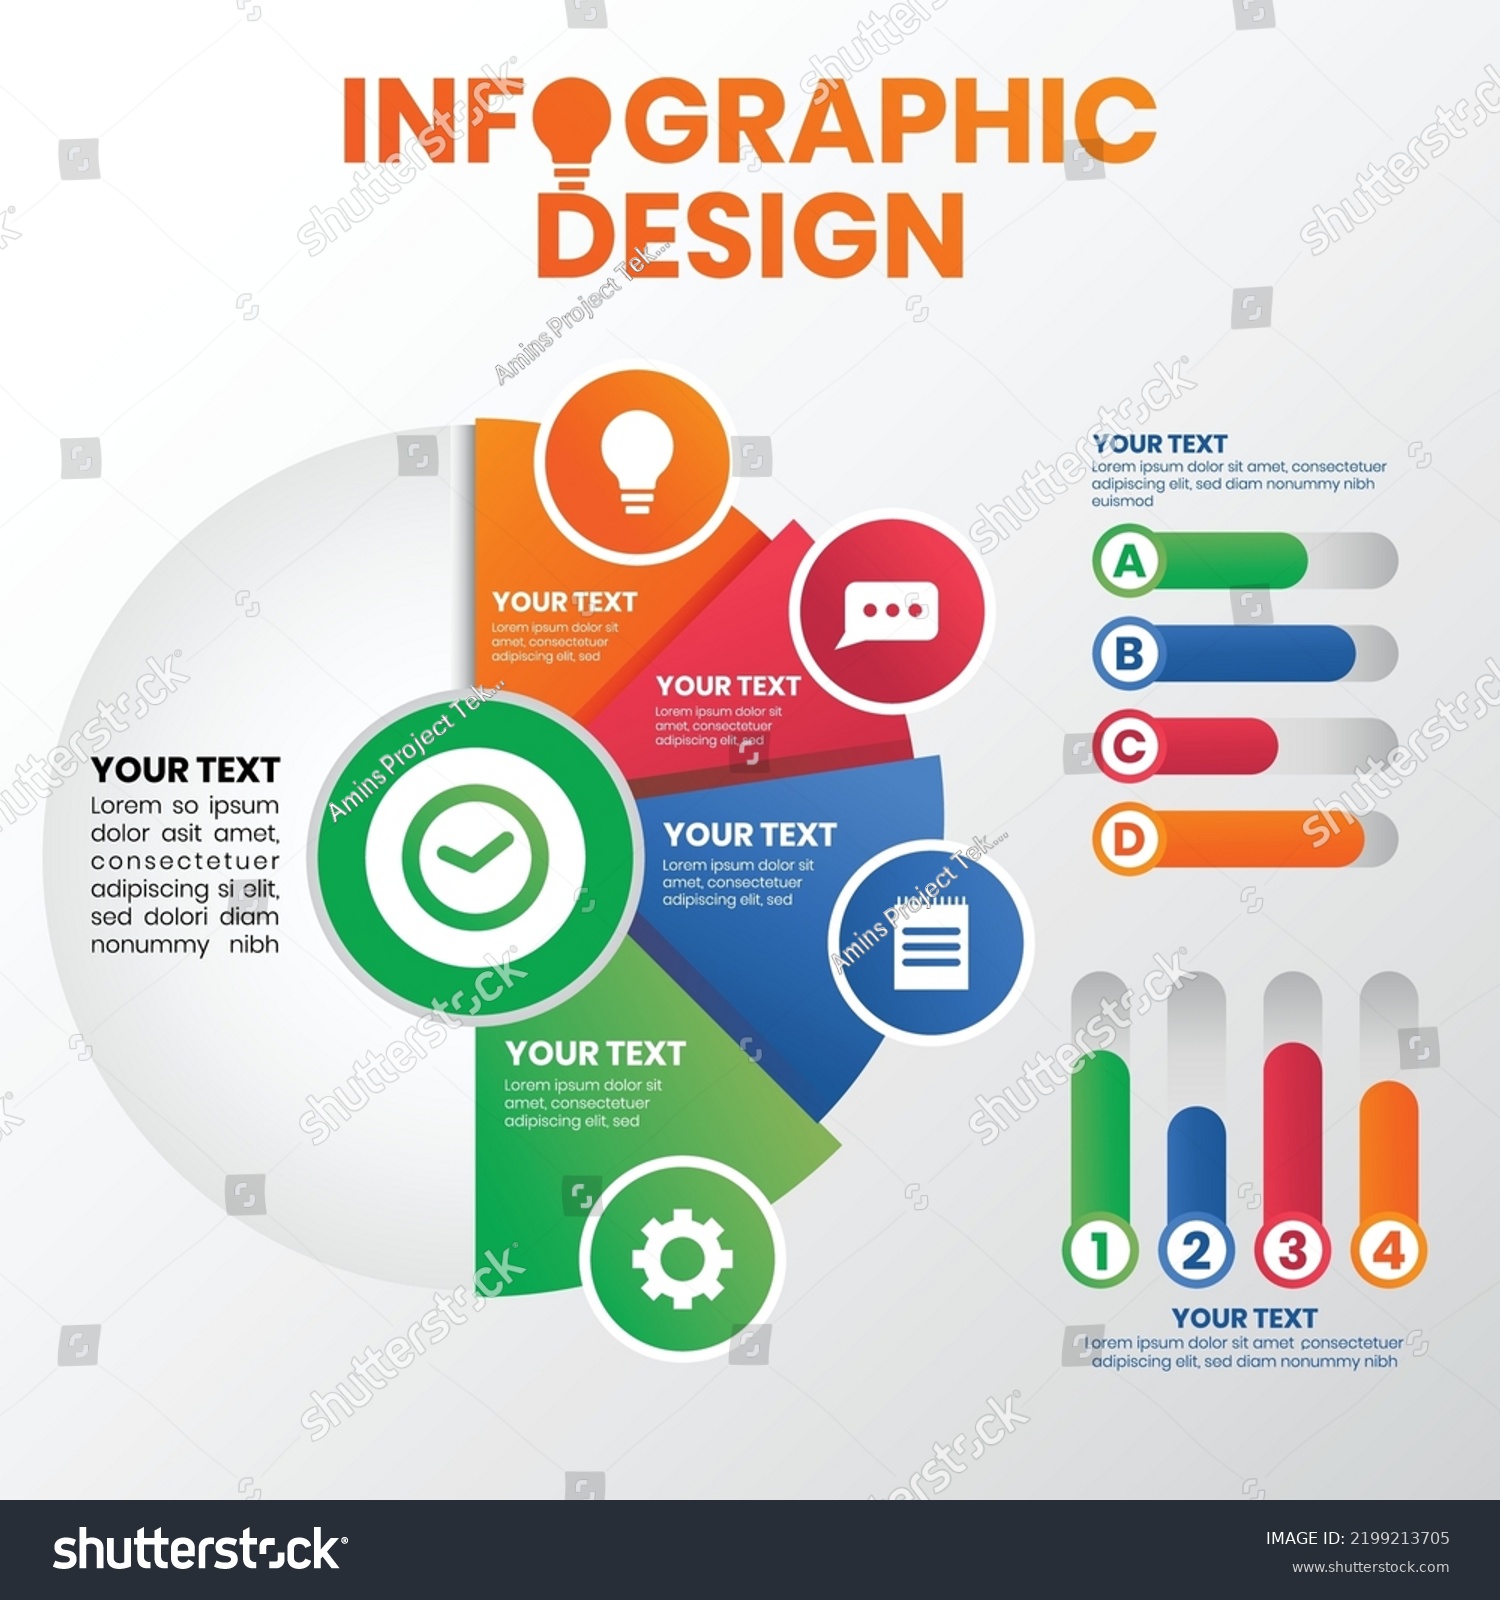 Infographic Elements Data Visualization Template Royalty Free Stock Vector 2199213705 2160